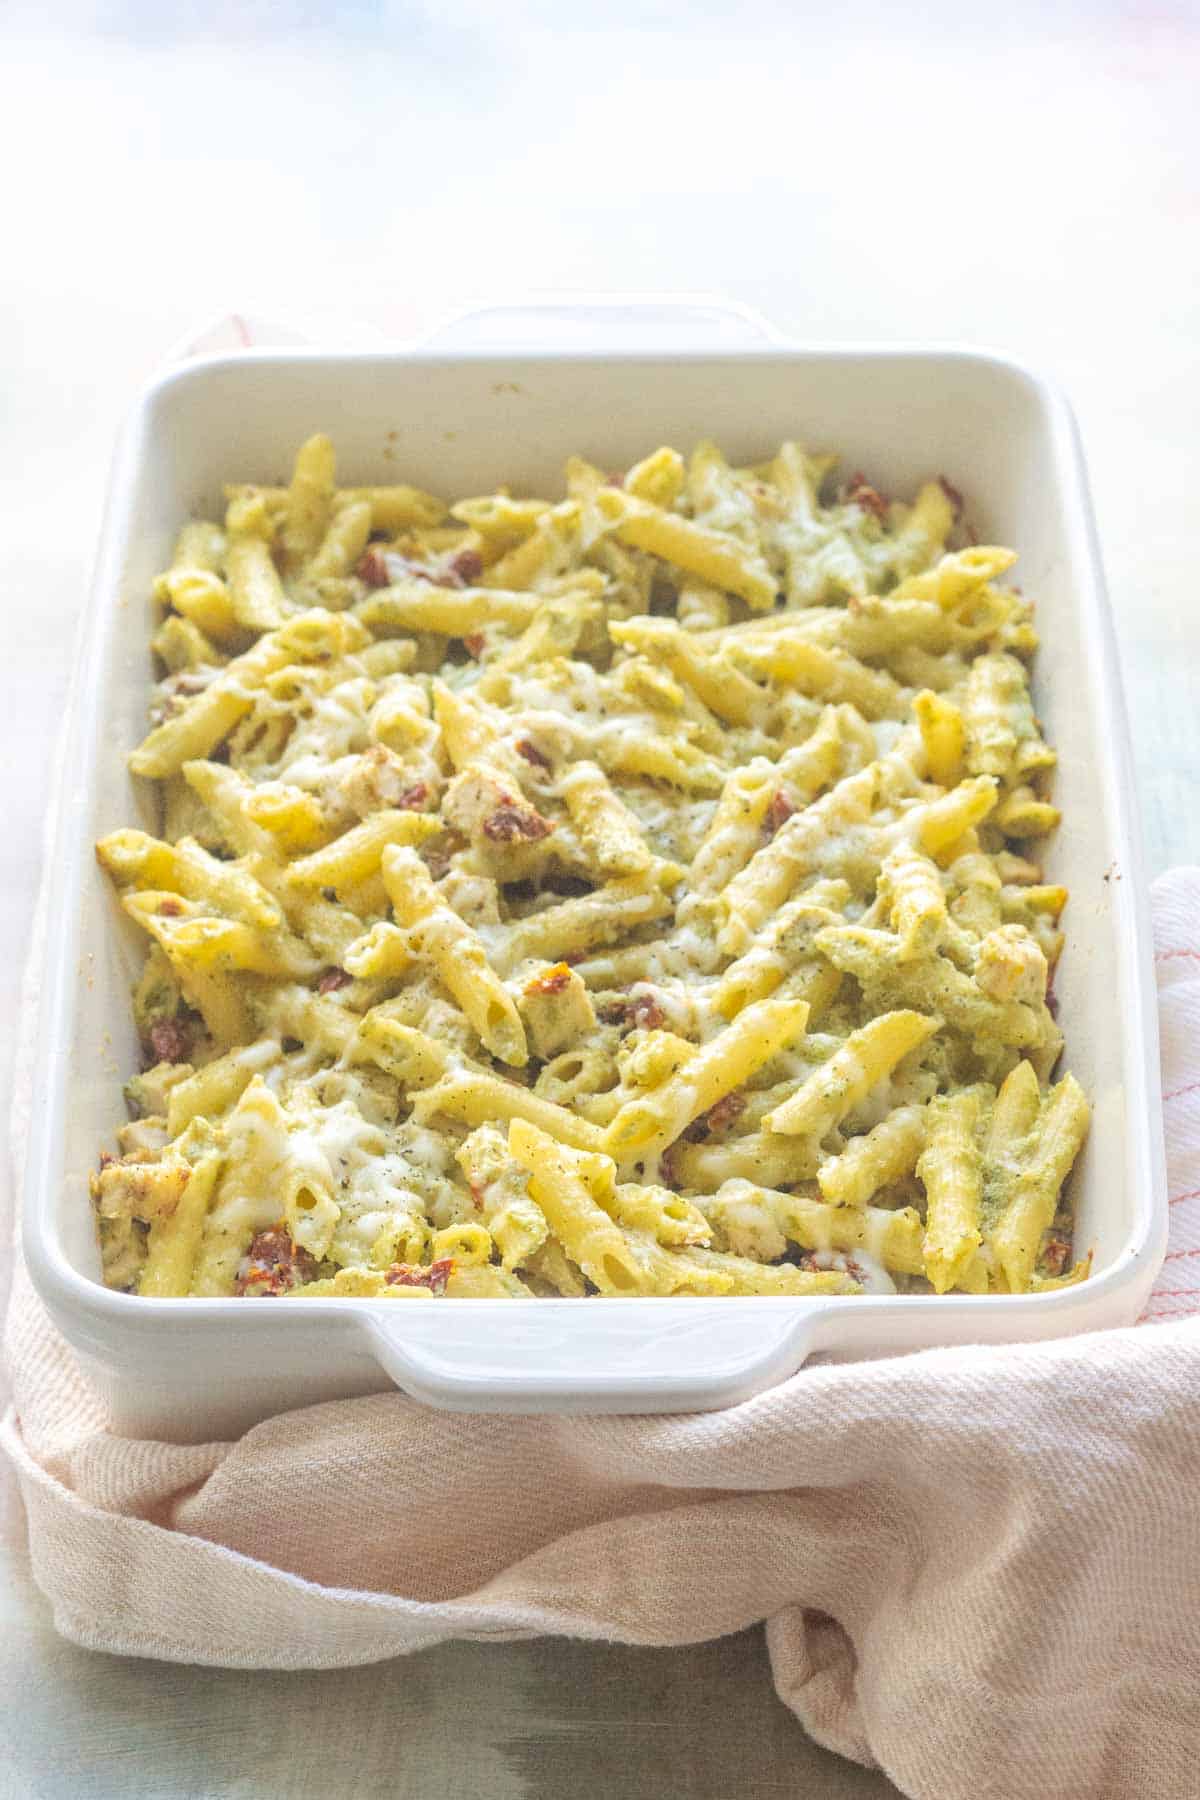 A baked pasta dish with melted cheese and herbs in a white rectangular casserole dish, resting on a beige cloth.